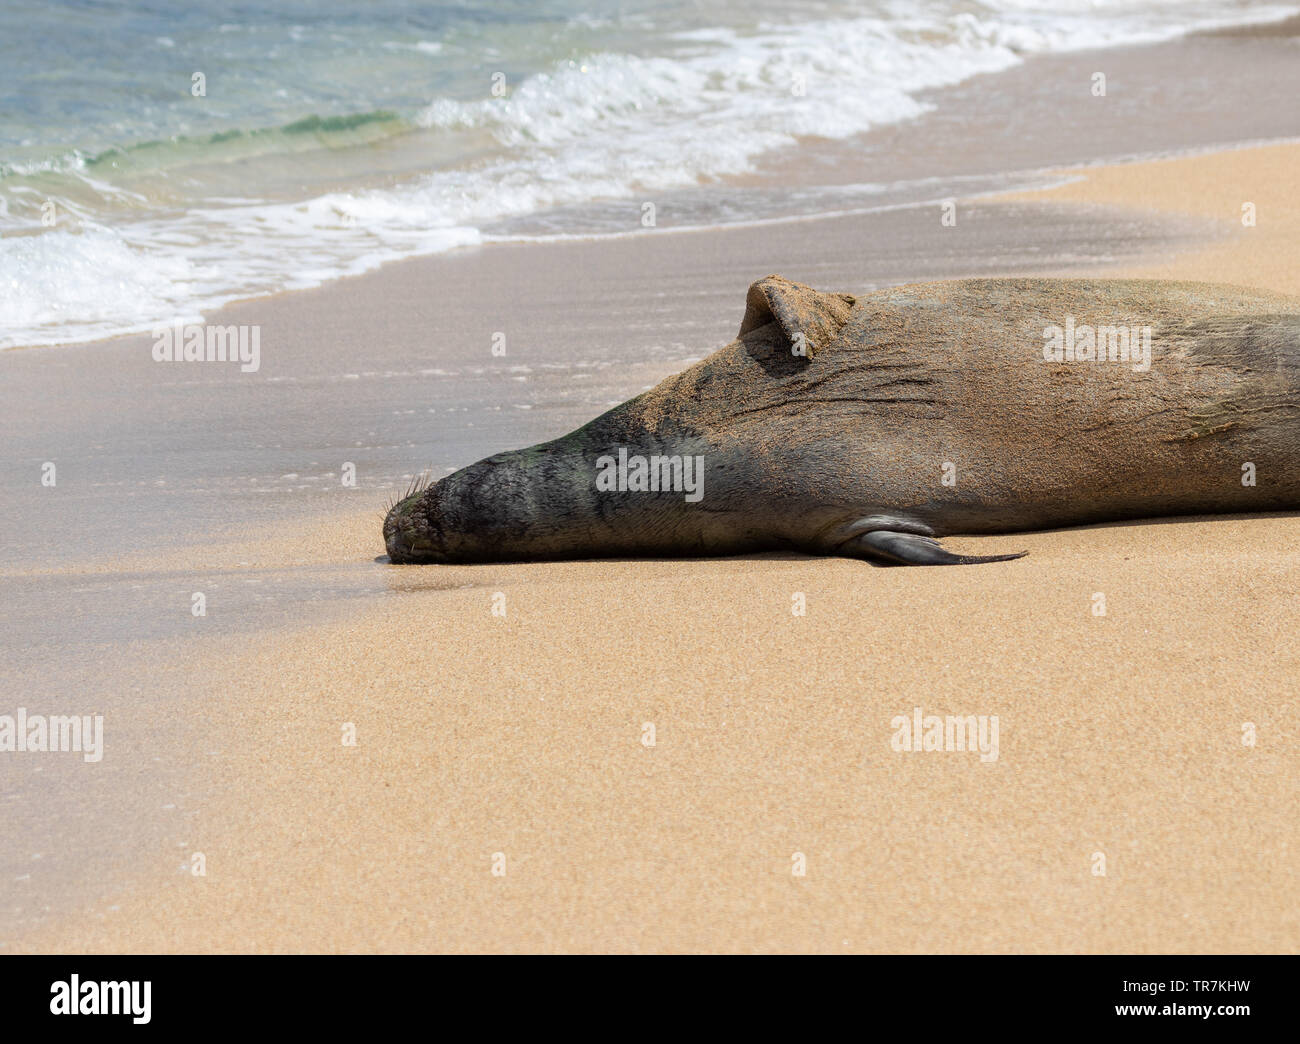 Monk seals are often found sunbathing along remote beaches in the warm Pacific waters around Hawaii. Stock Photo